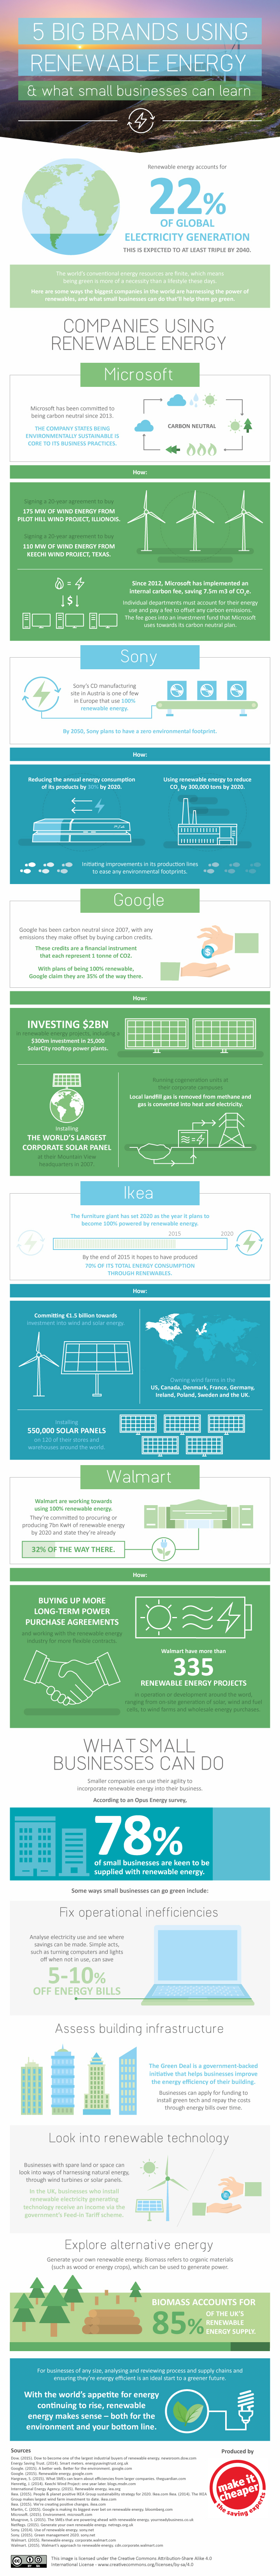 5 Big Brands Using Renewable Energy & What Small Businesses Can Learn